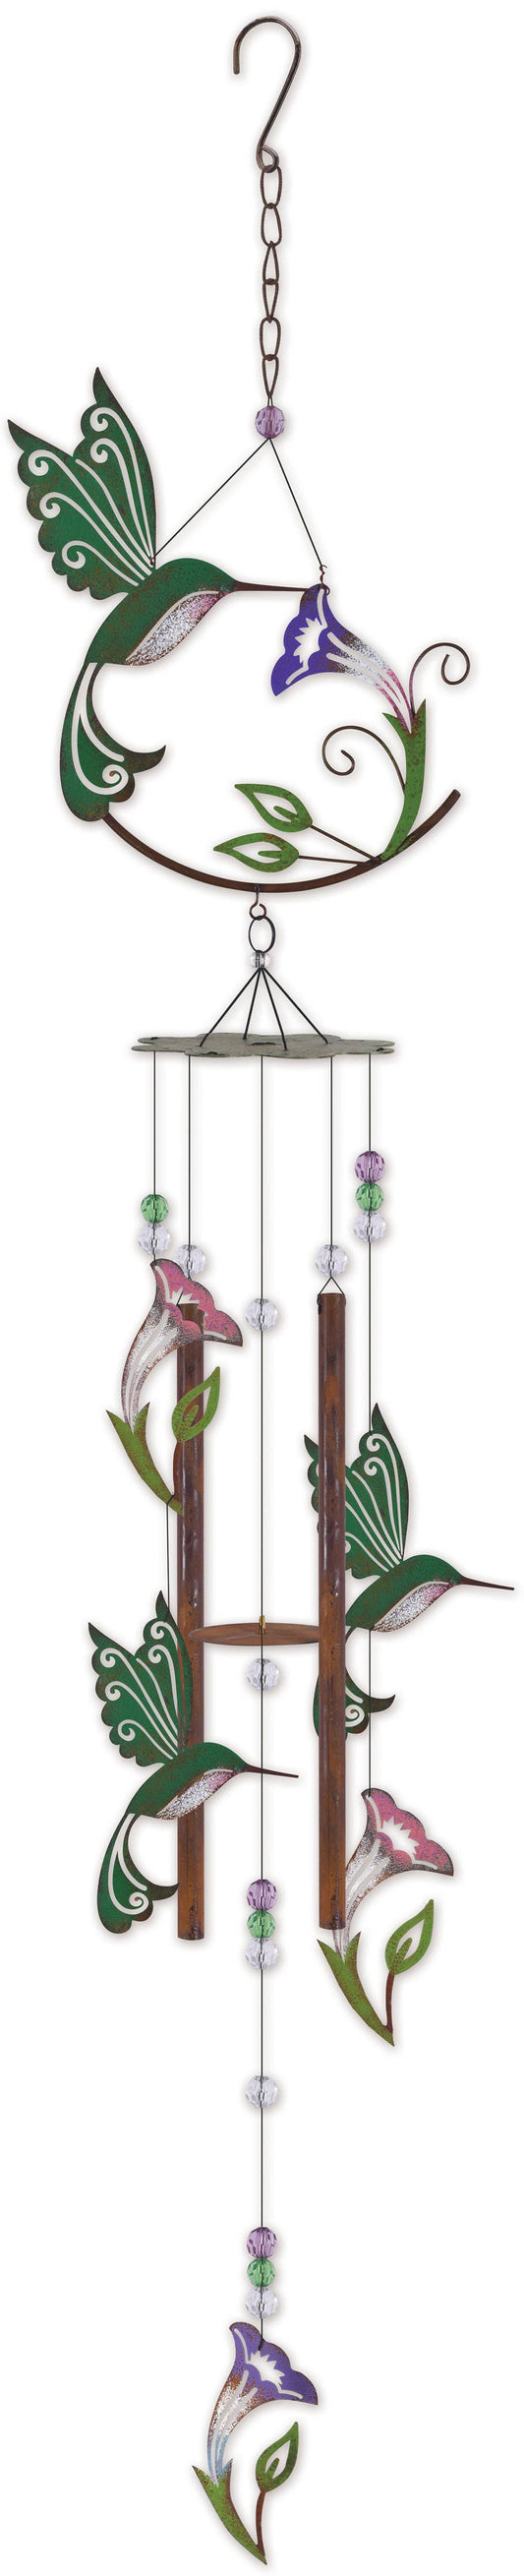 Hummingbird and Flower Chime